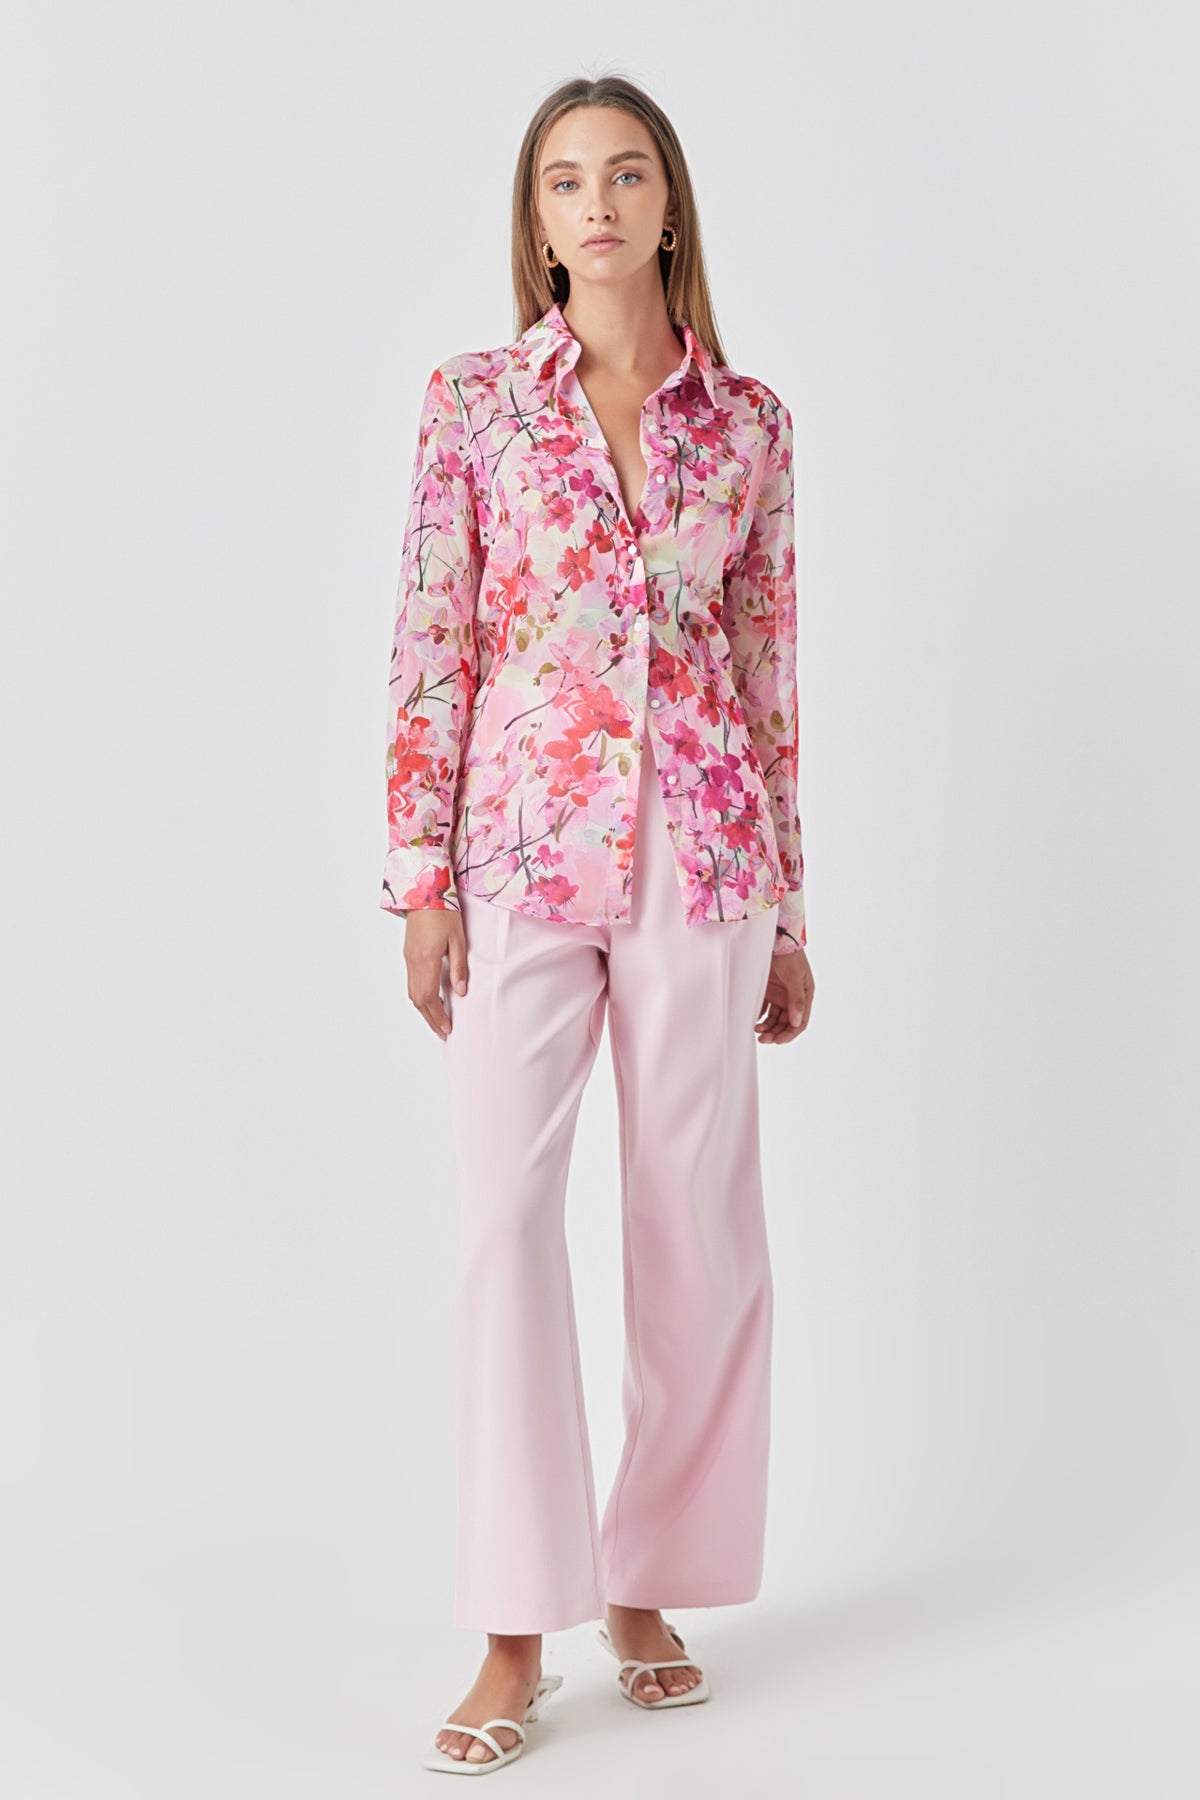 ENDLESS ROSE - Floral Print Oversize Shirt - SHIRTS & BLOUSES available at Objectrare